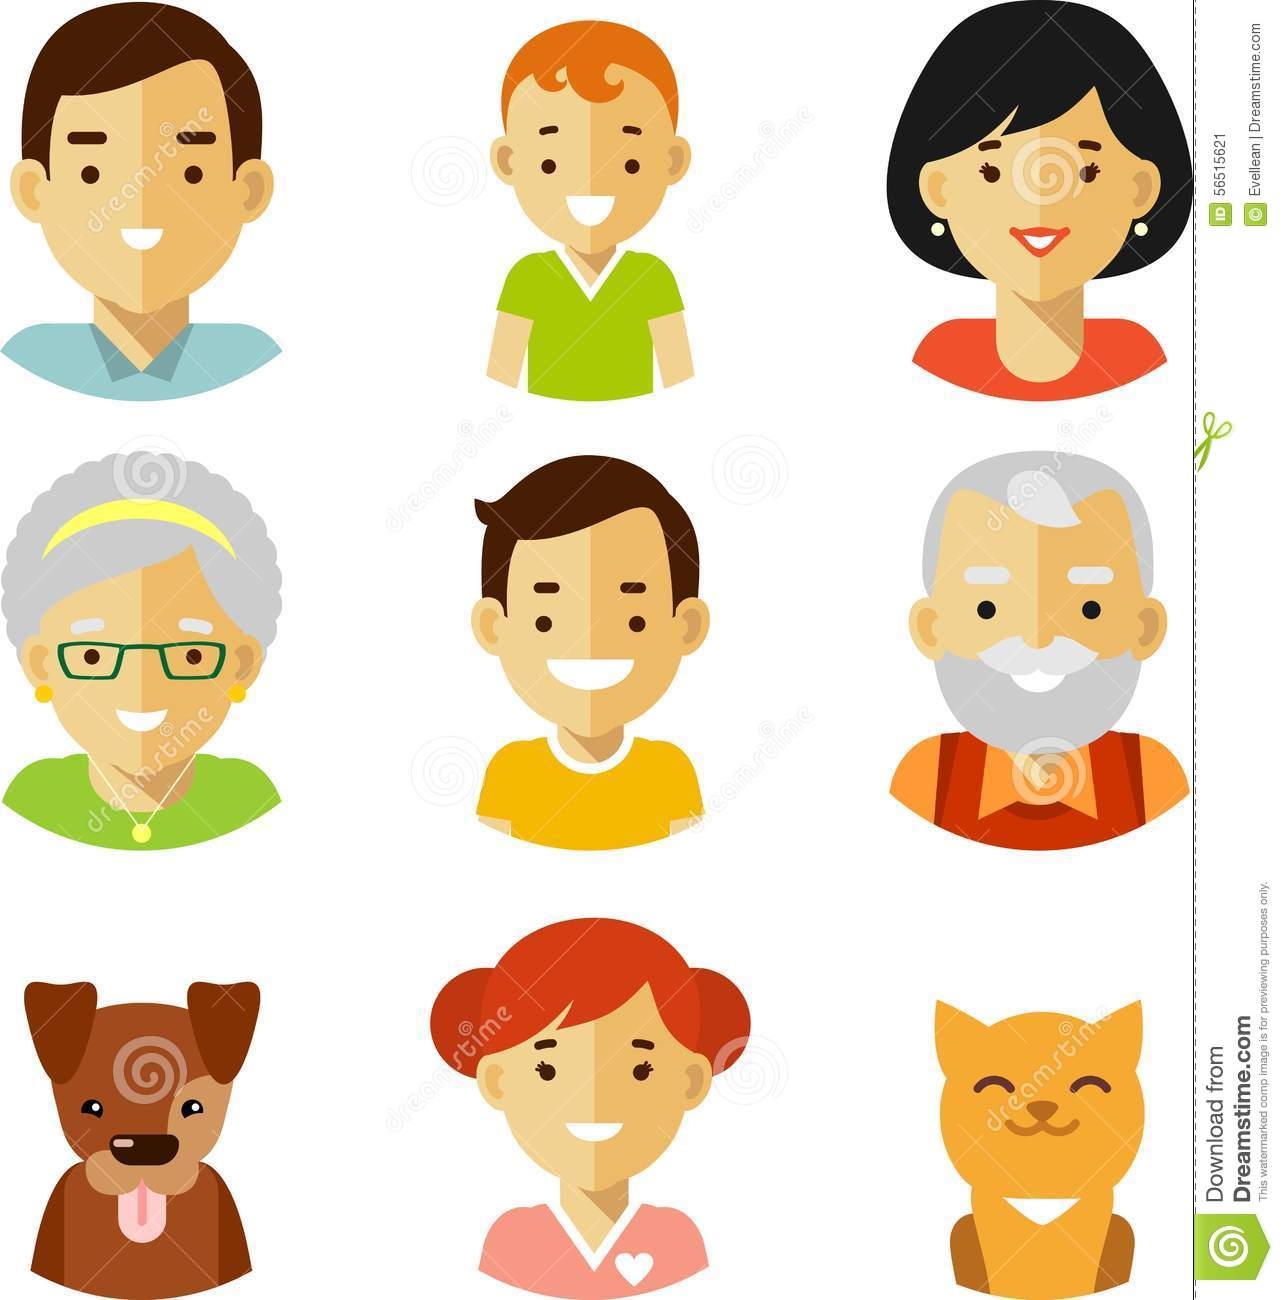 clipart-images-of-family-members-20-free-cliparts-download-images-on